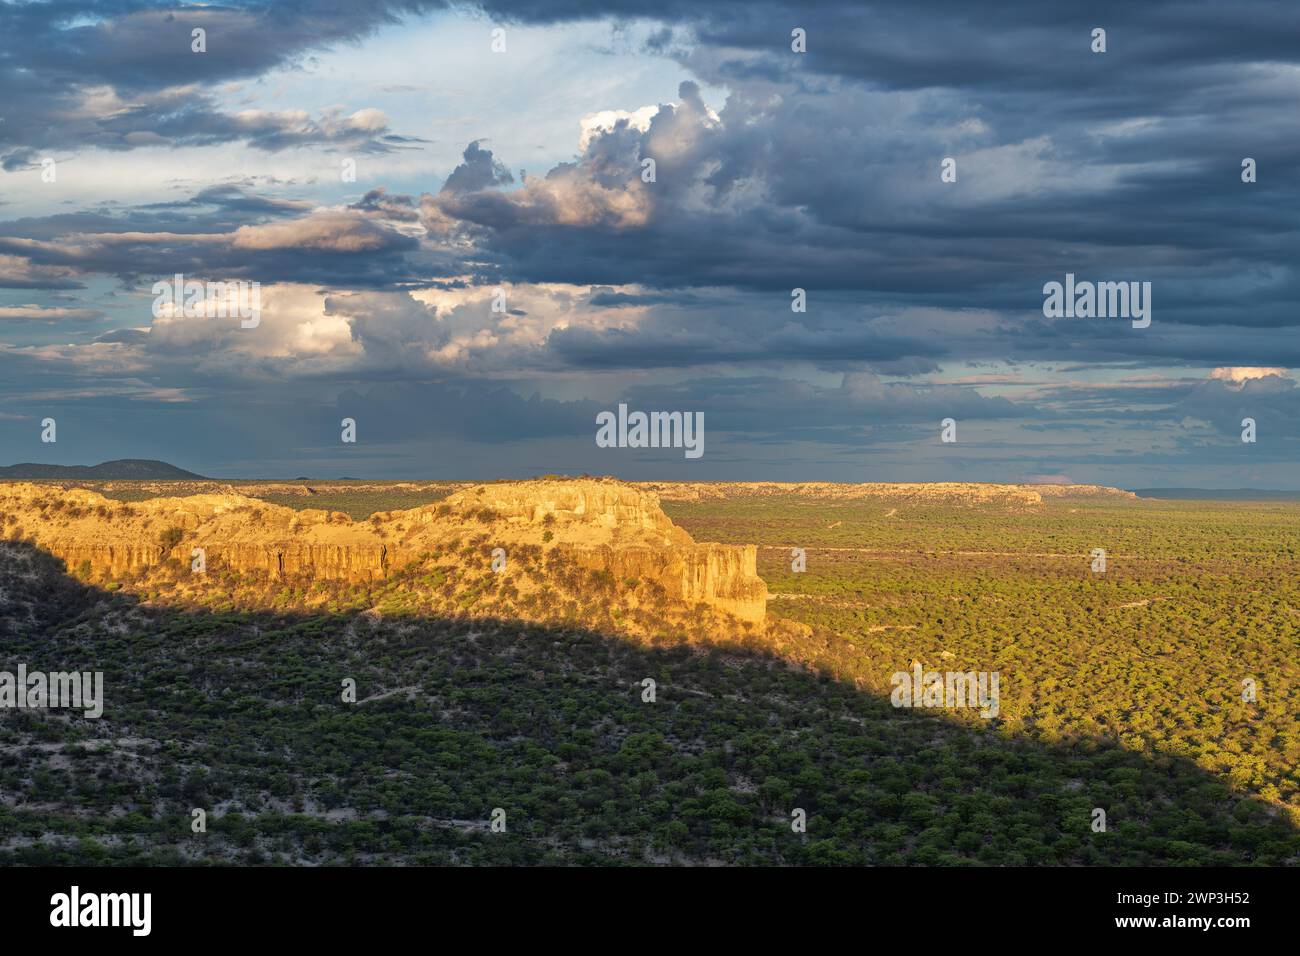 View of Ugab valley and terraces, Damaraland, Namibia Stock Photo